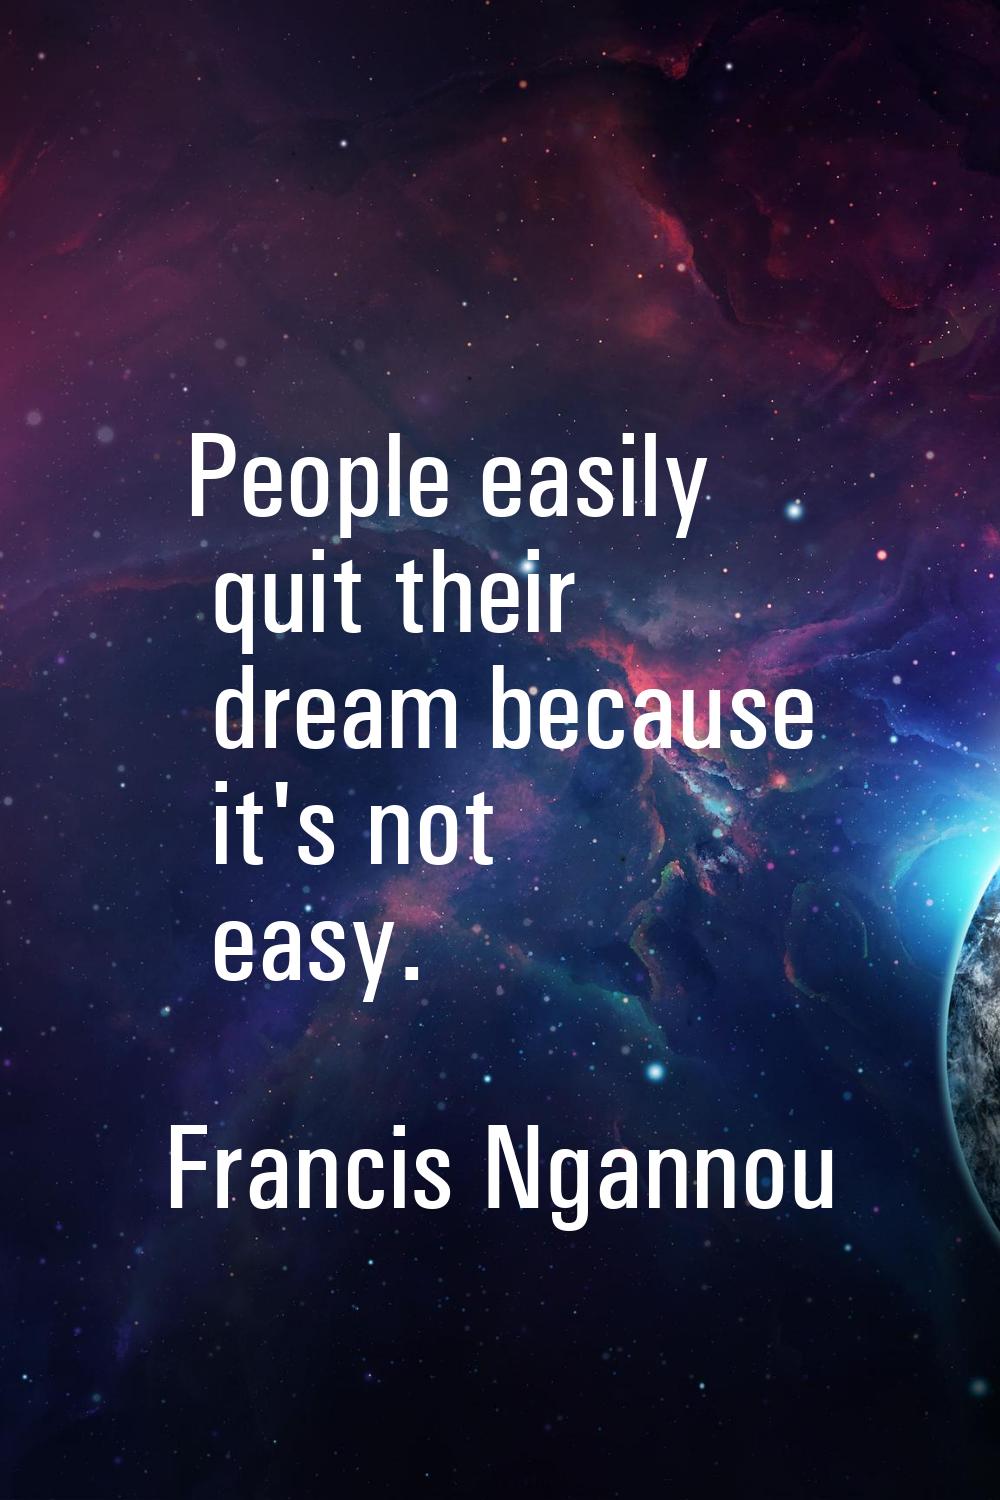 People easily quit their dream because it's not easy.